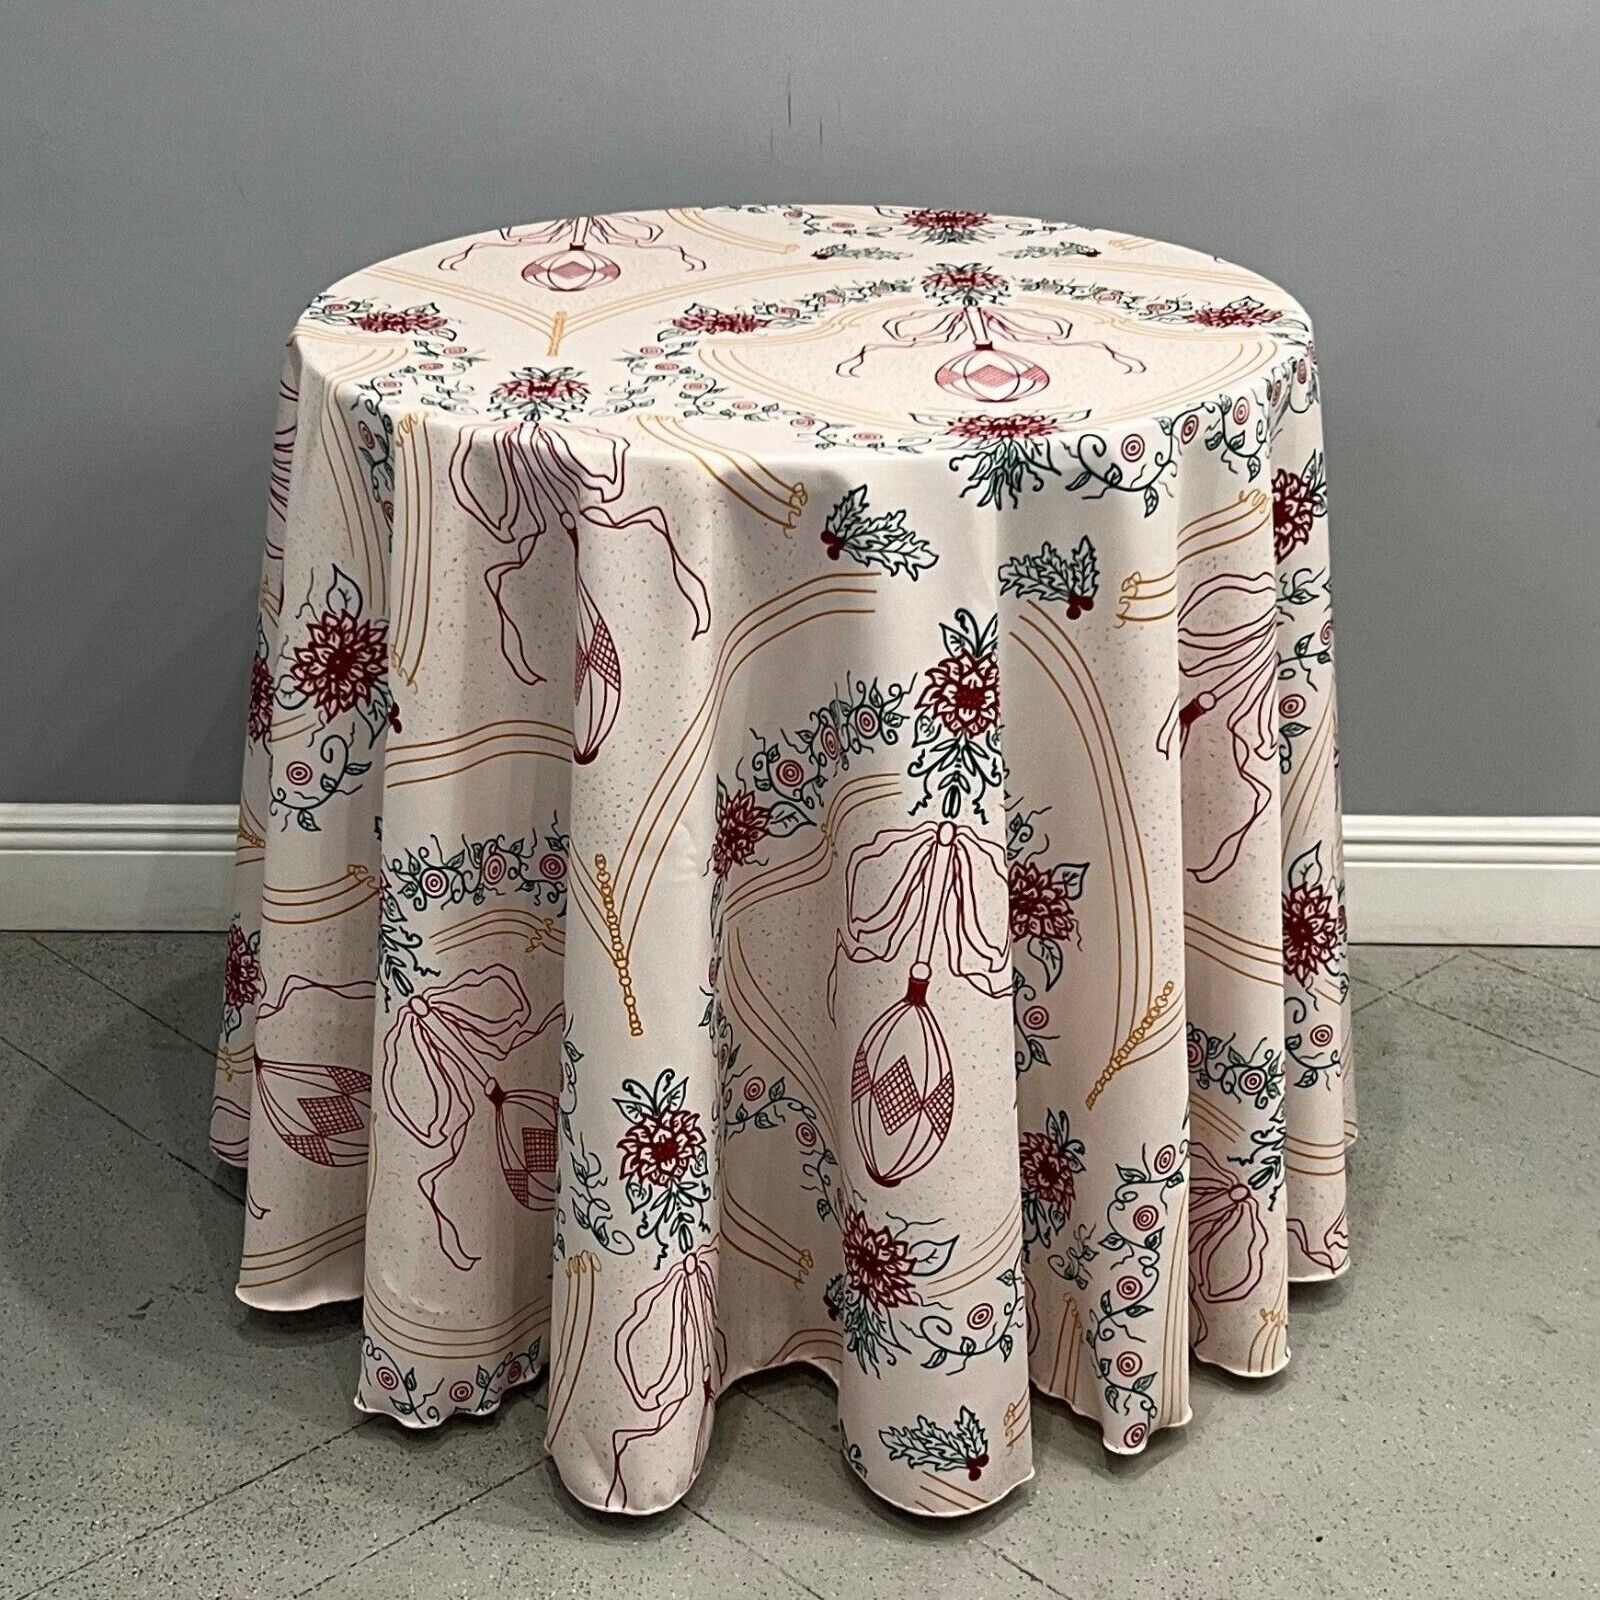 Christmas Tablecloths, All Sizes incuding Oval Tablecloths, 4 Holiday Prints